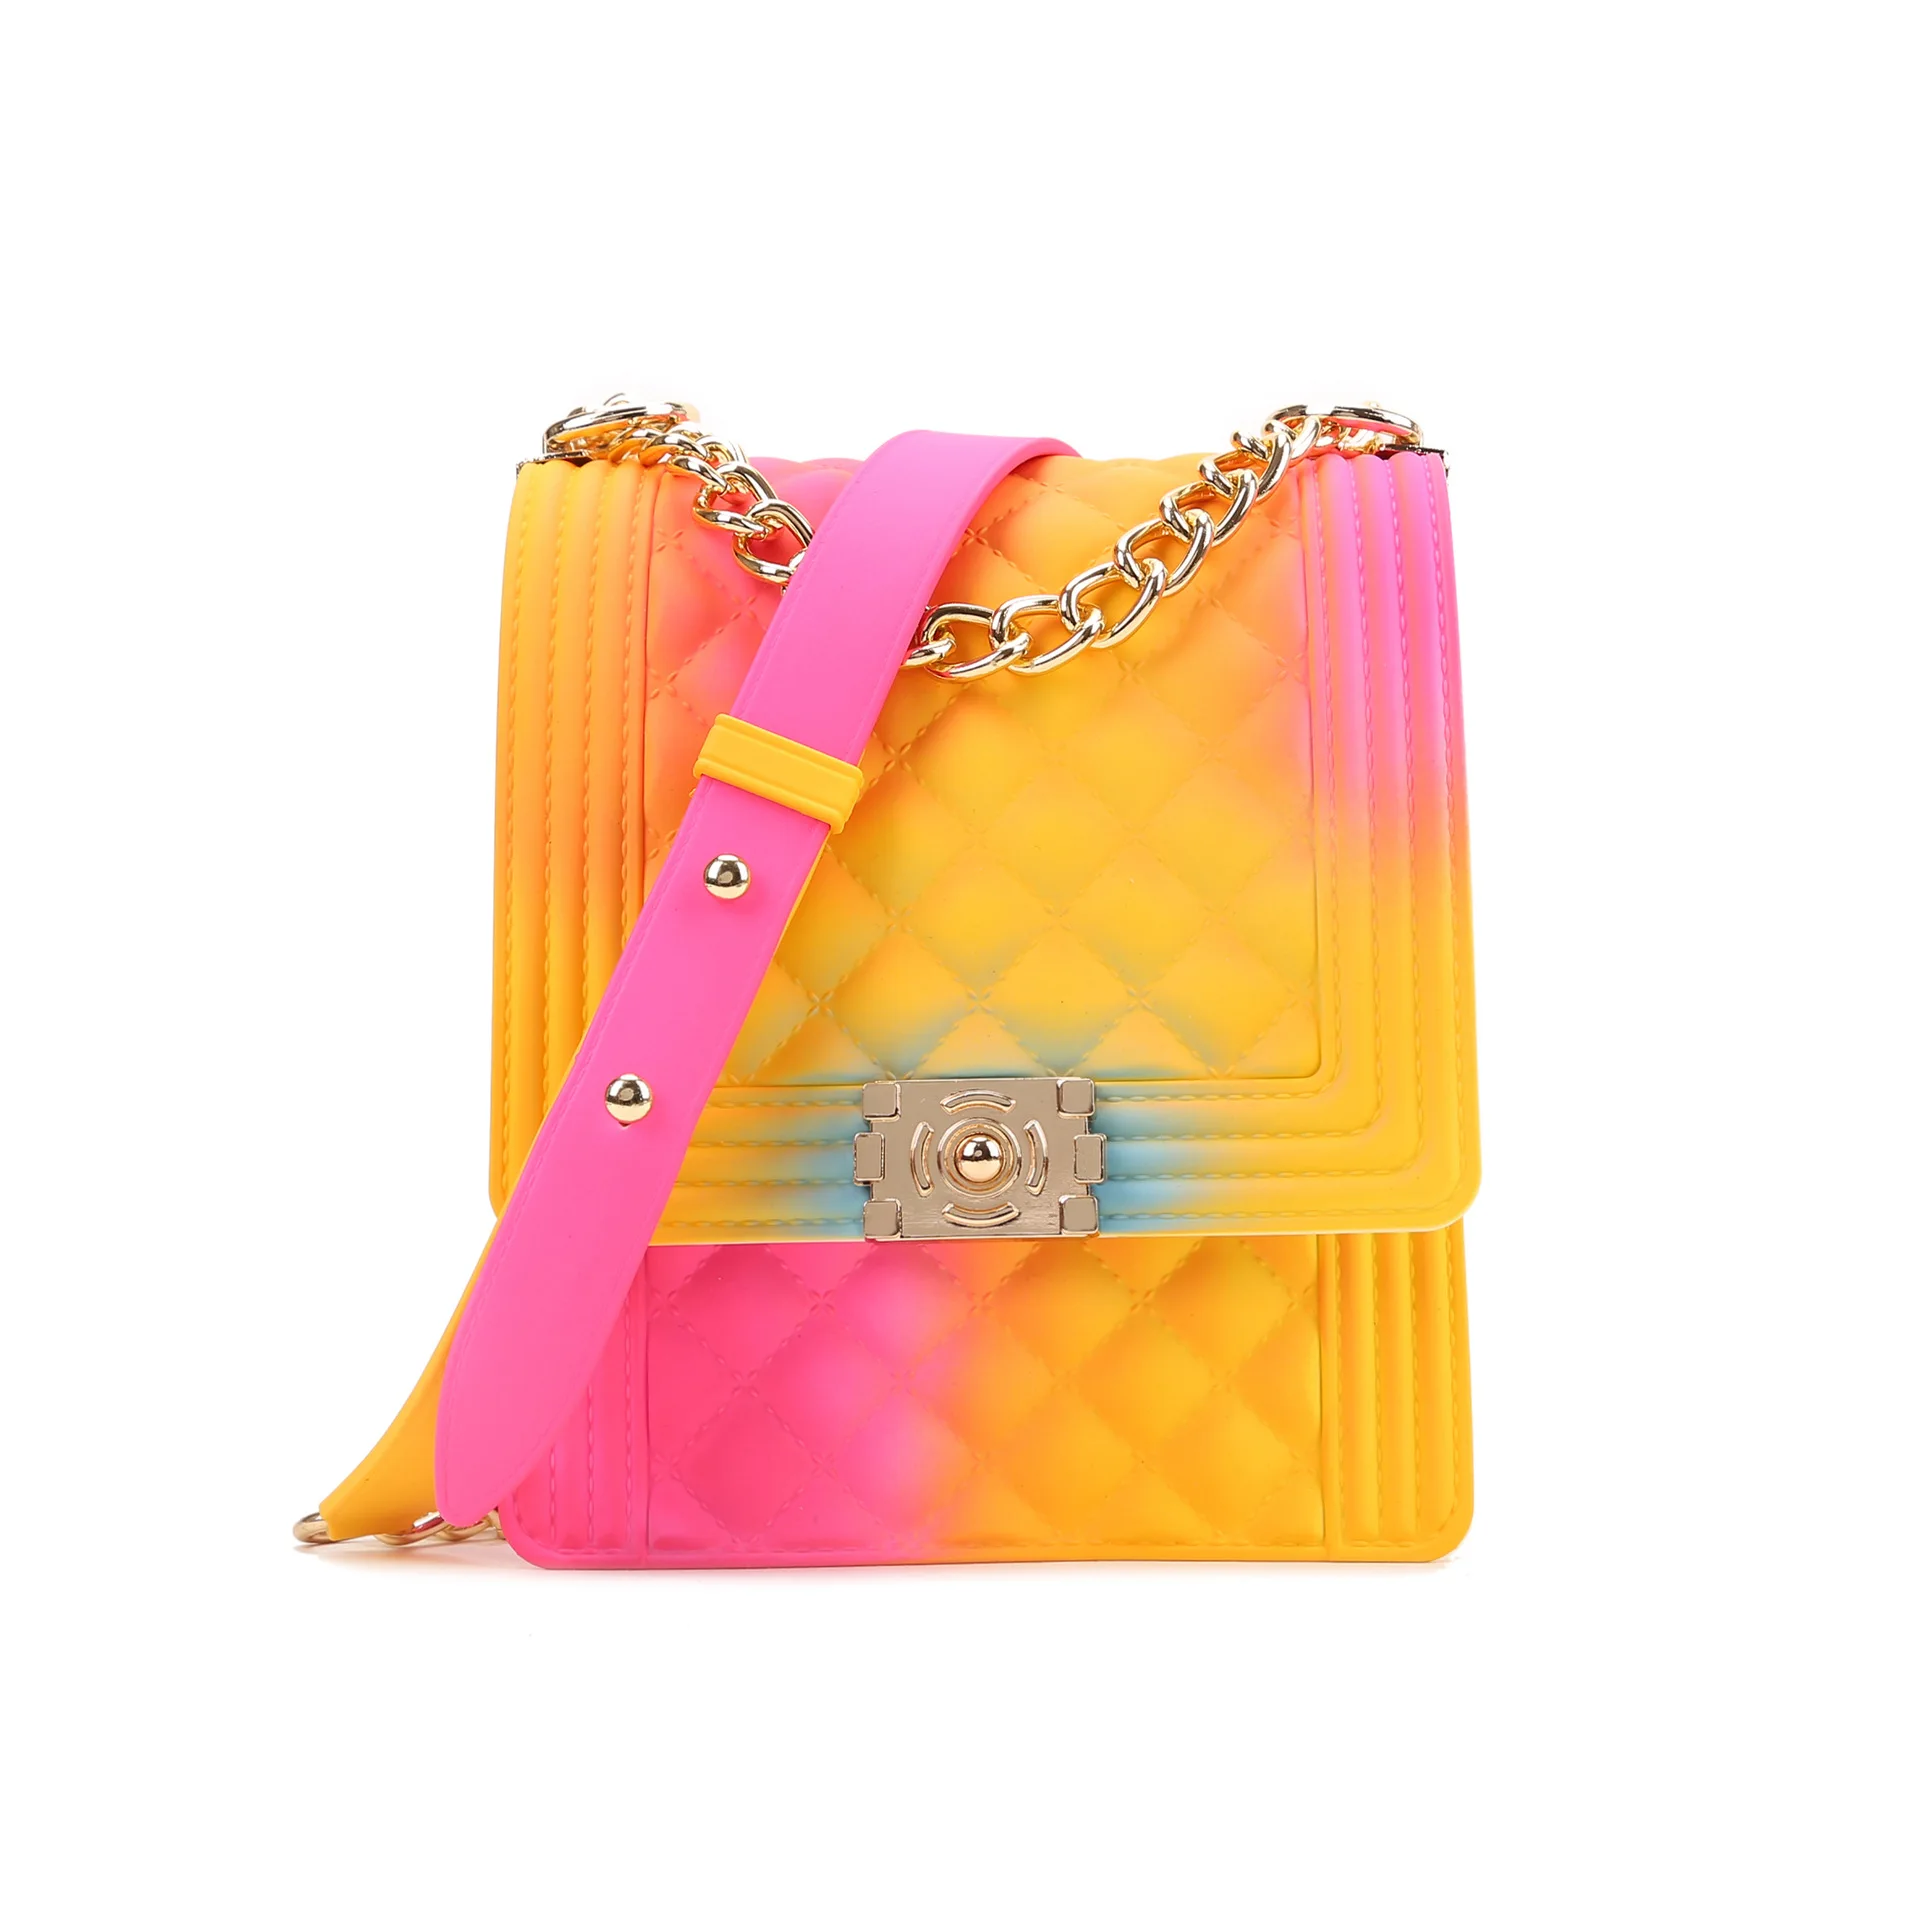 pastel rainbow jelly purse with gold chain | eBay